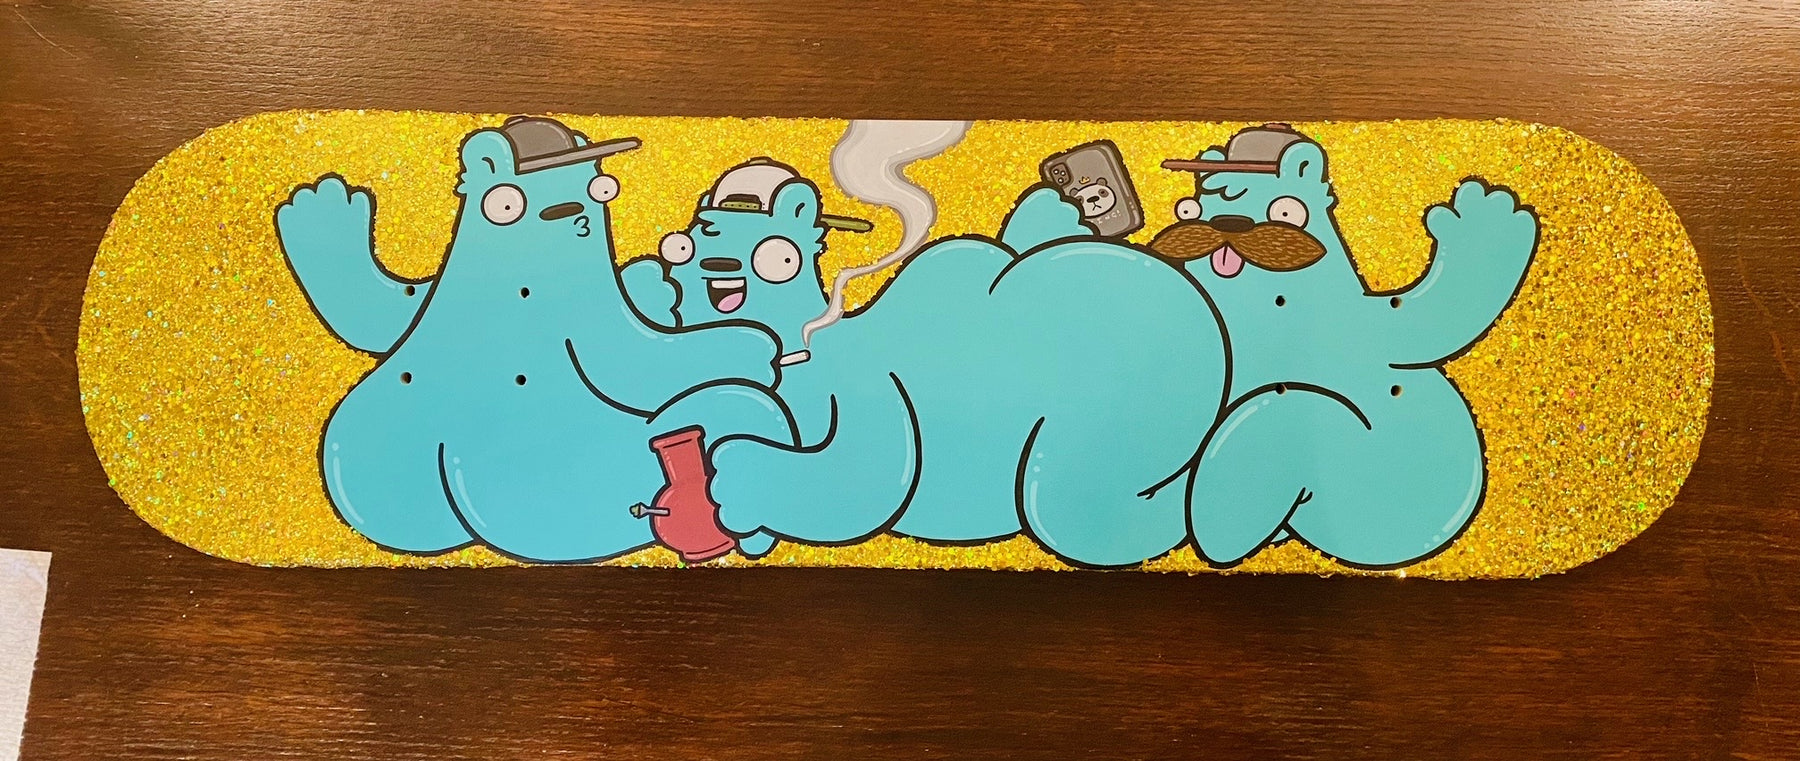 Deck the Halls - KIll Taupe - "Buds & Butts" - Skatedeck